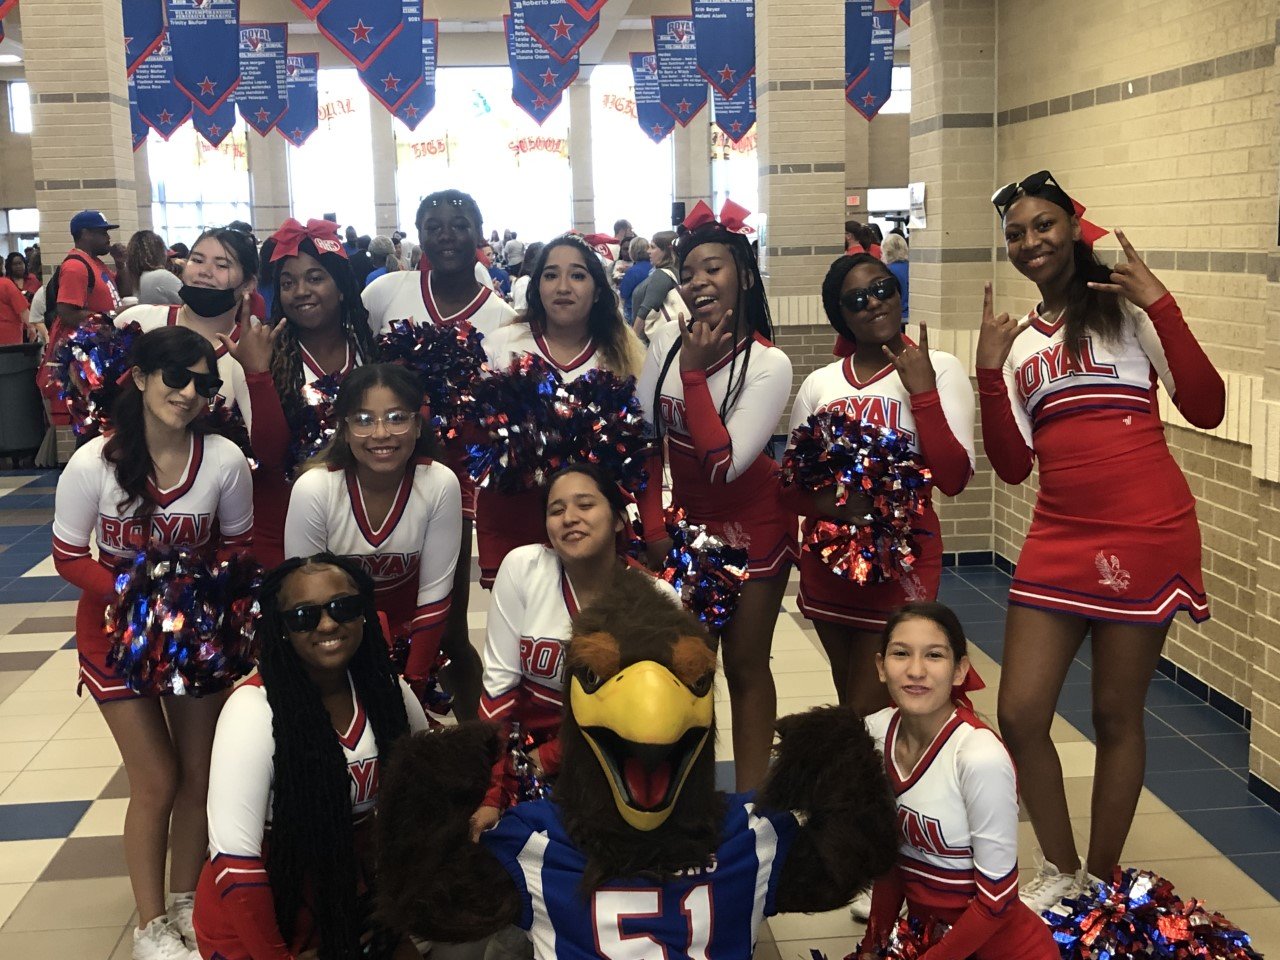 The Falcon mascot and cheerleaders welcomed Royal ISD teachers and staff to the district’s Aug. 11 convocation at Royal High School.